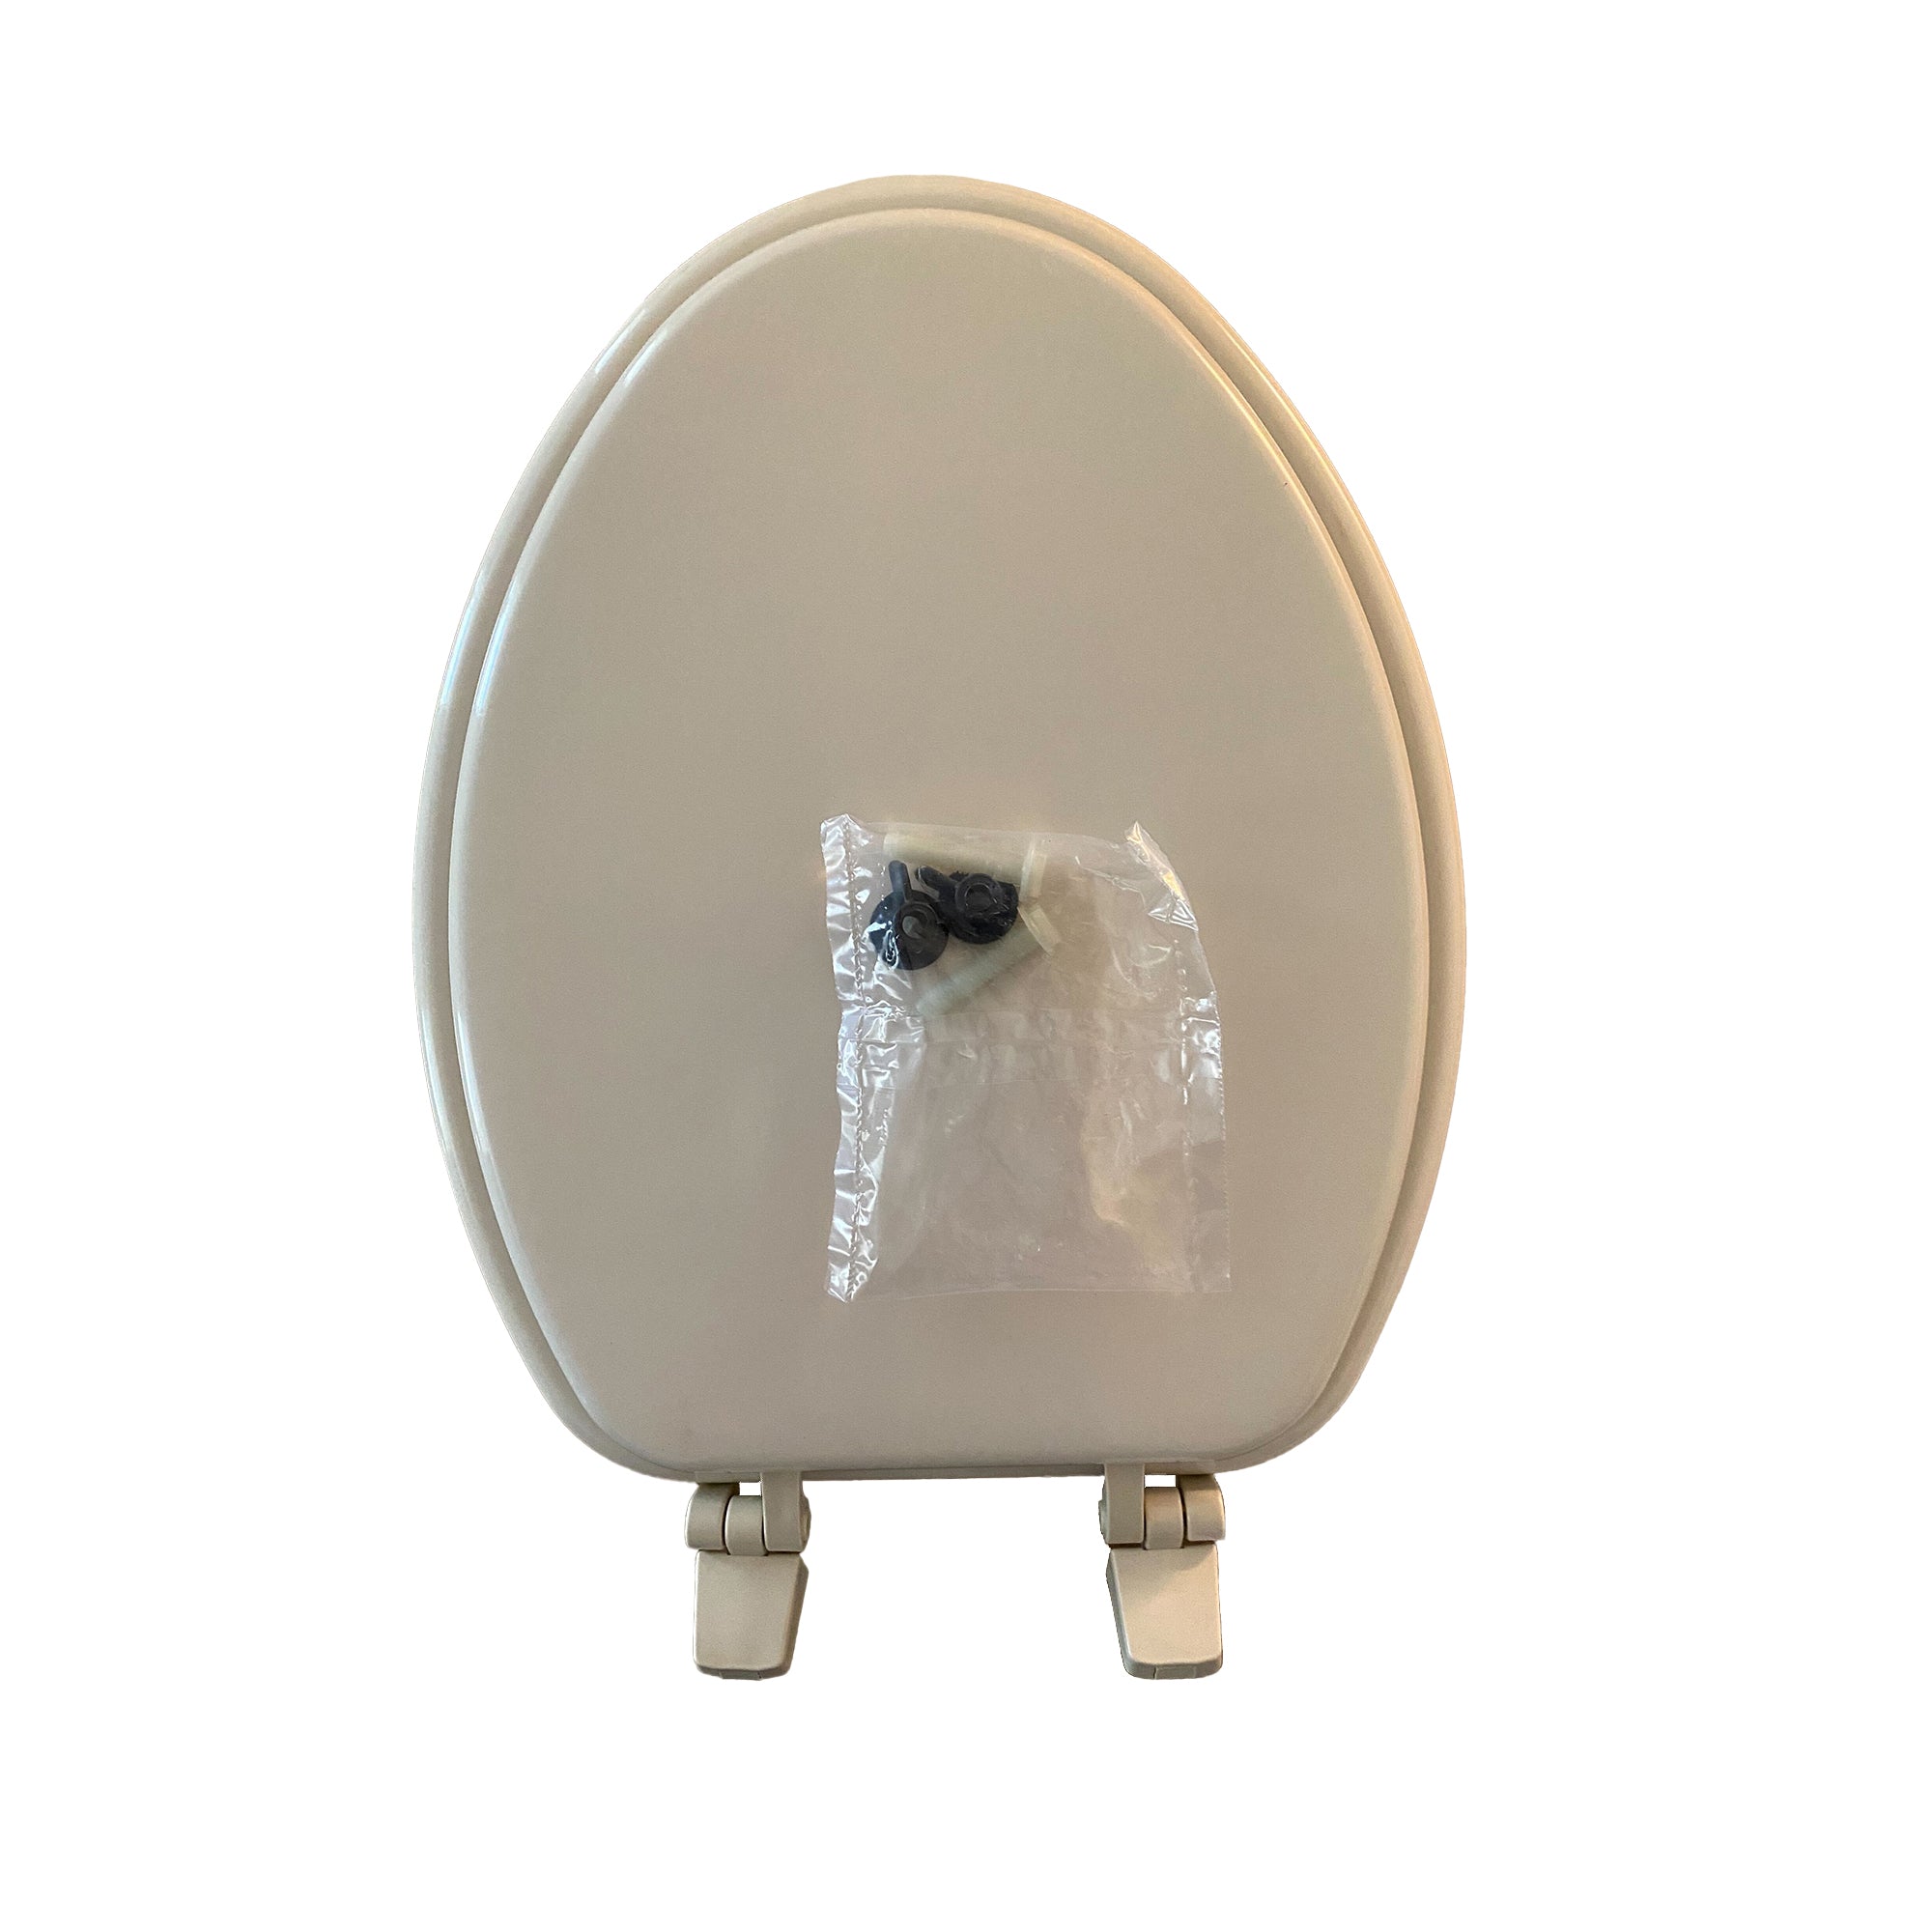 Dometic 385311864 Toilet Seat and Lid for 320 Series Bone